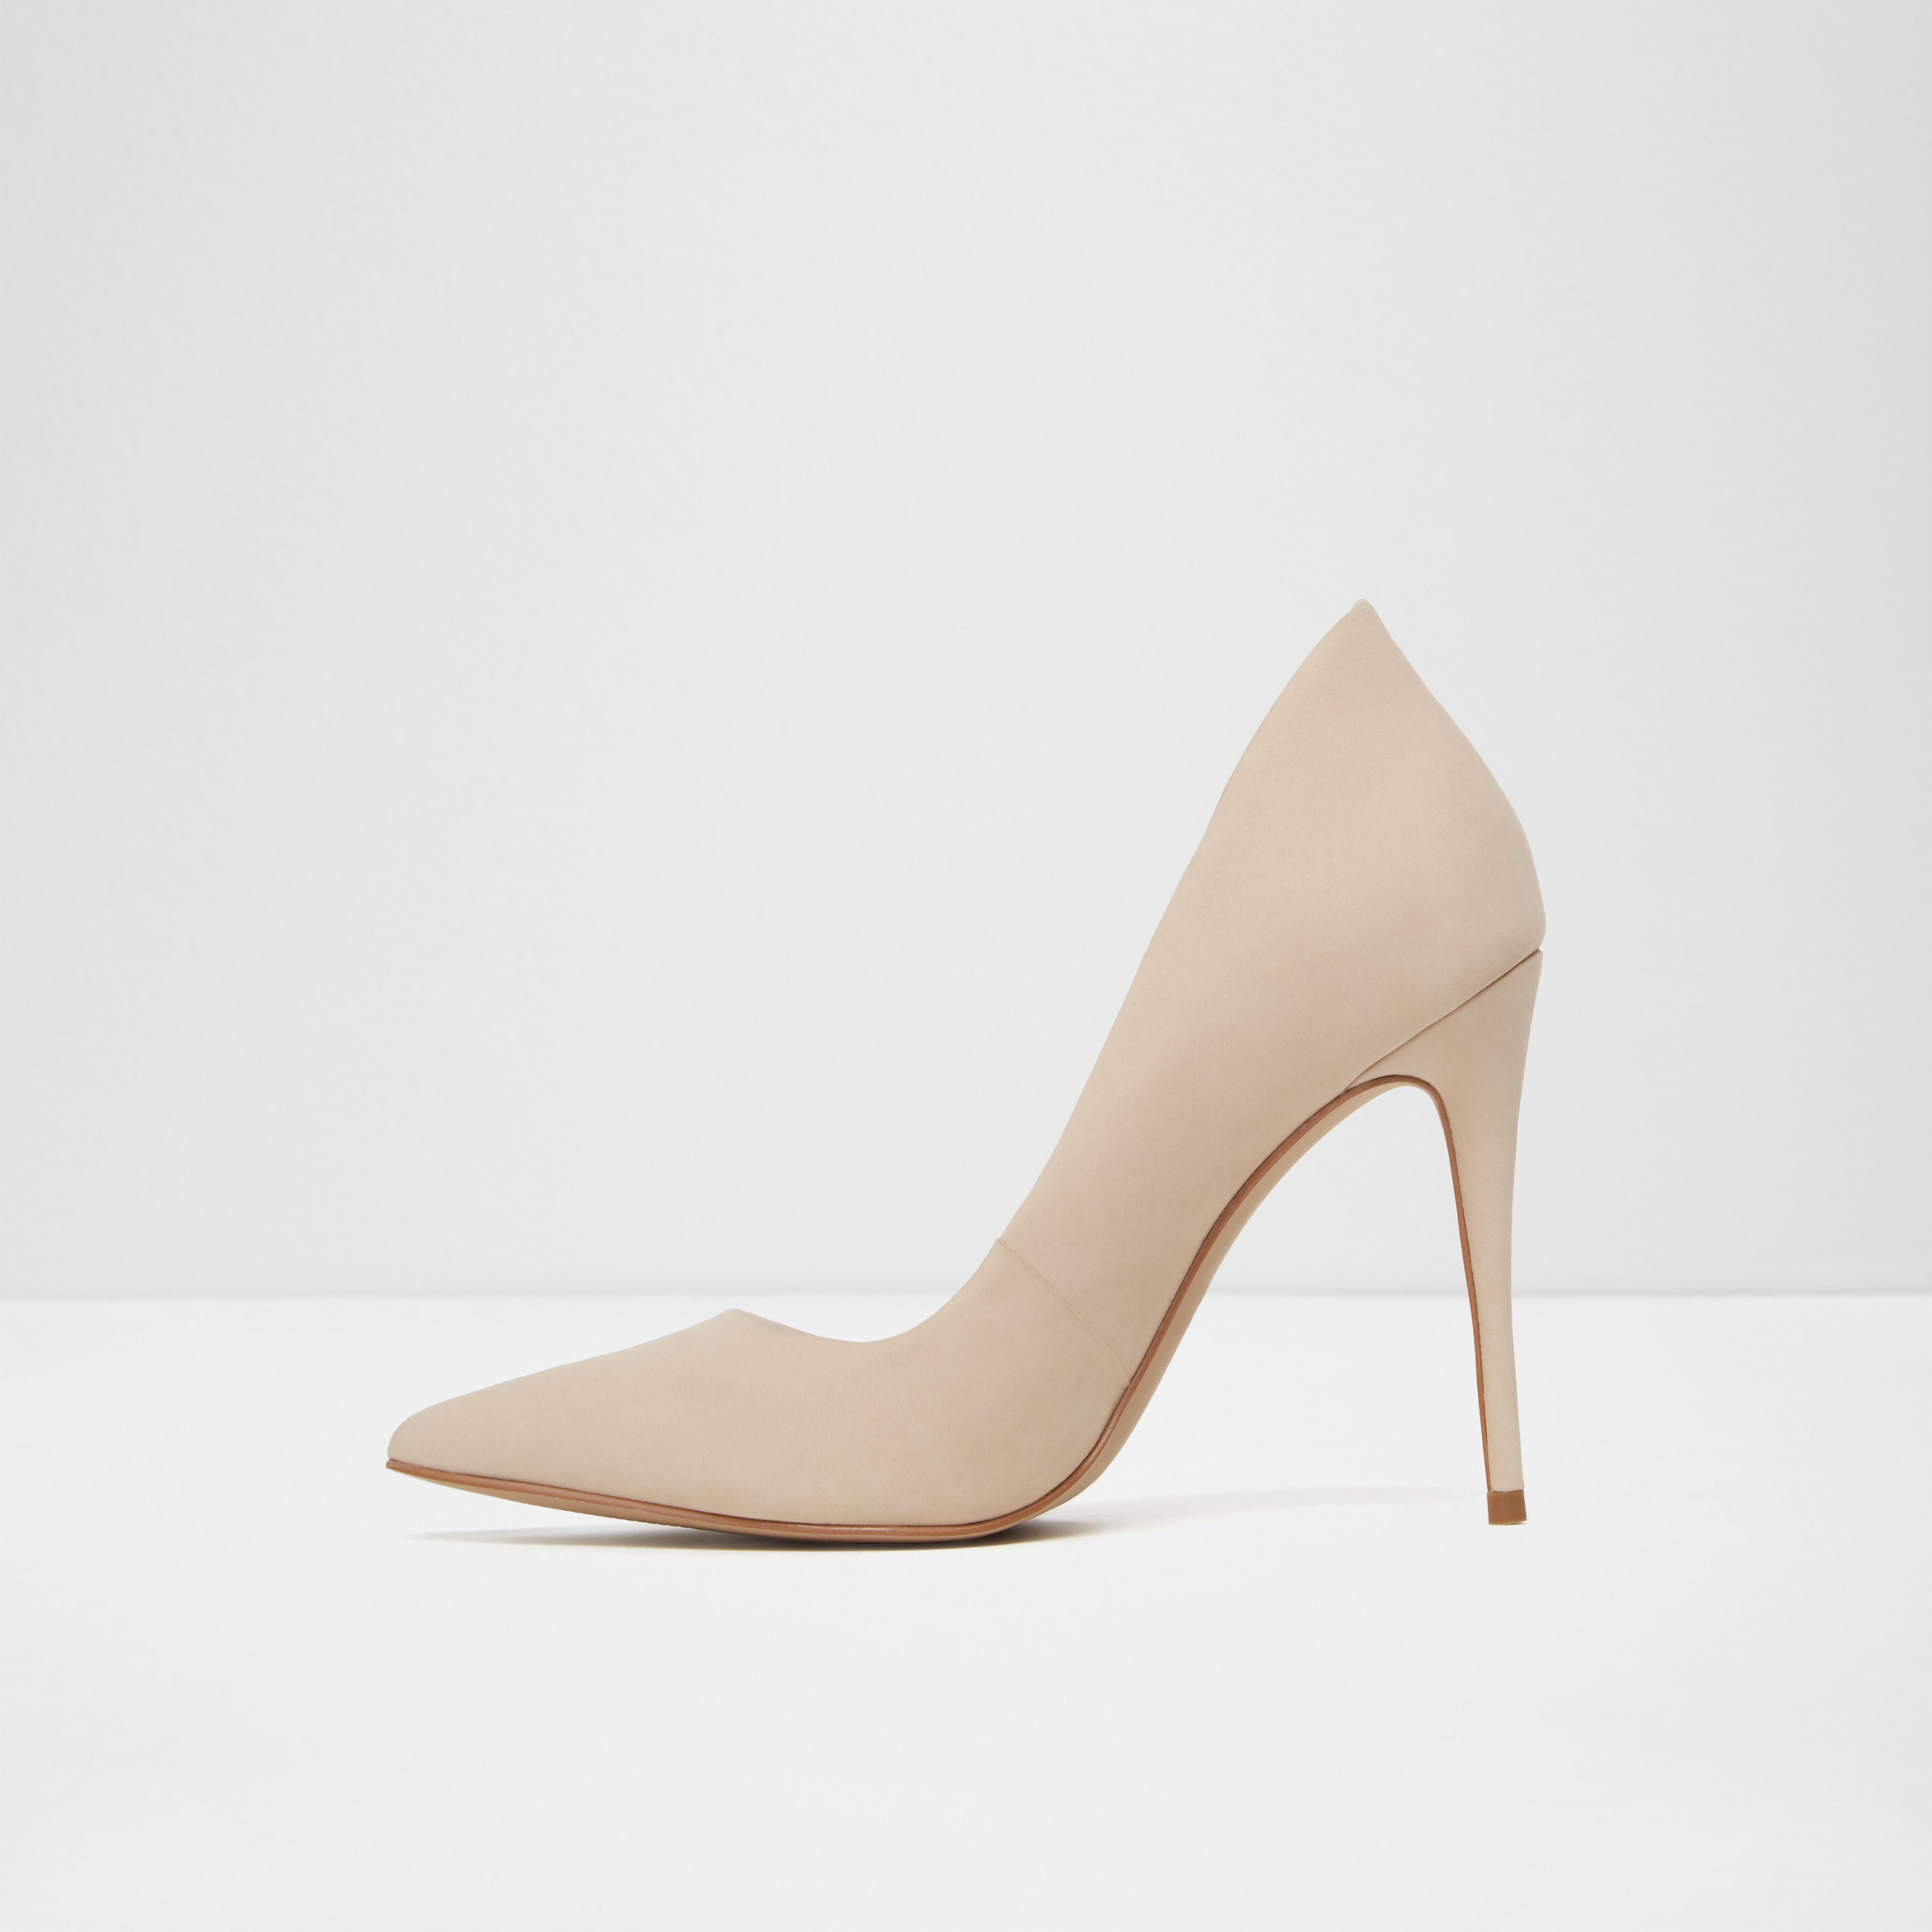 ALDO Synthetic Cassedy in Beige/Taupe (Natural) - Lyst